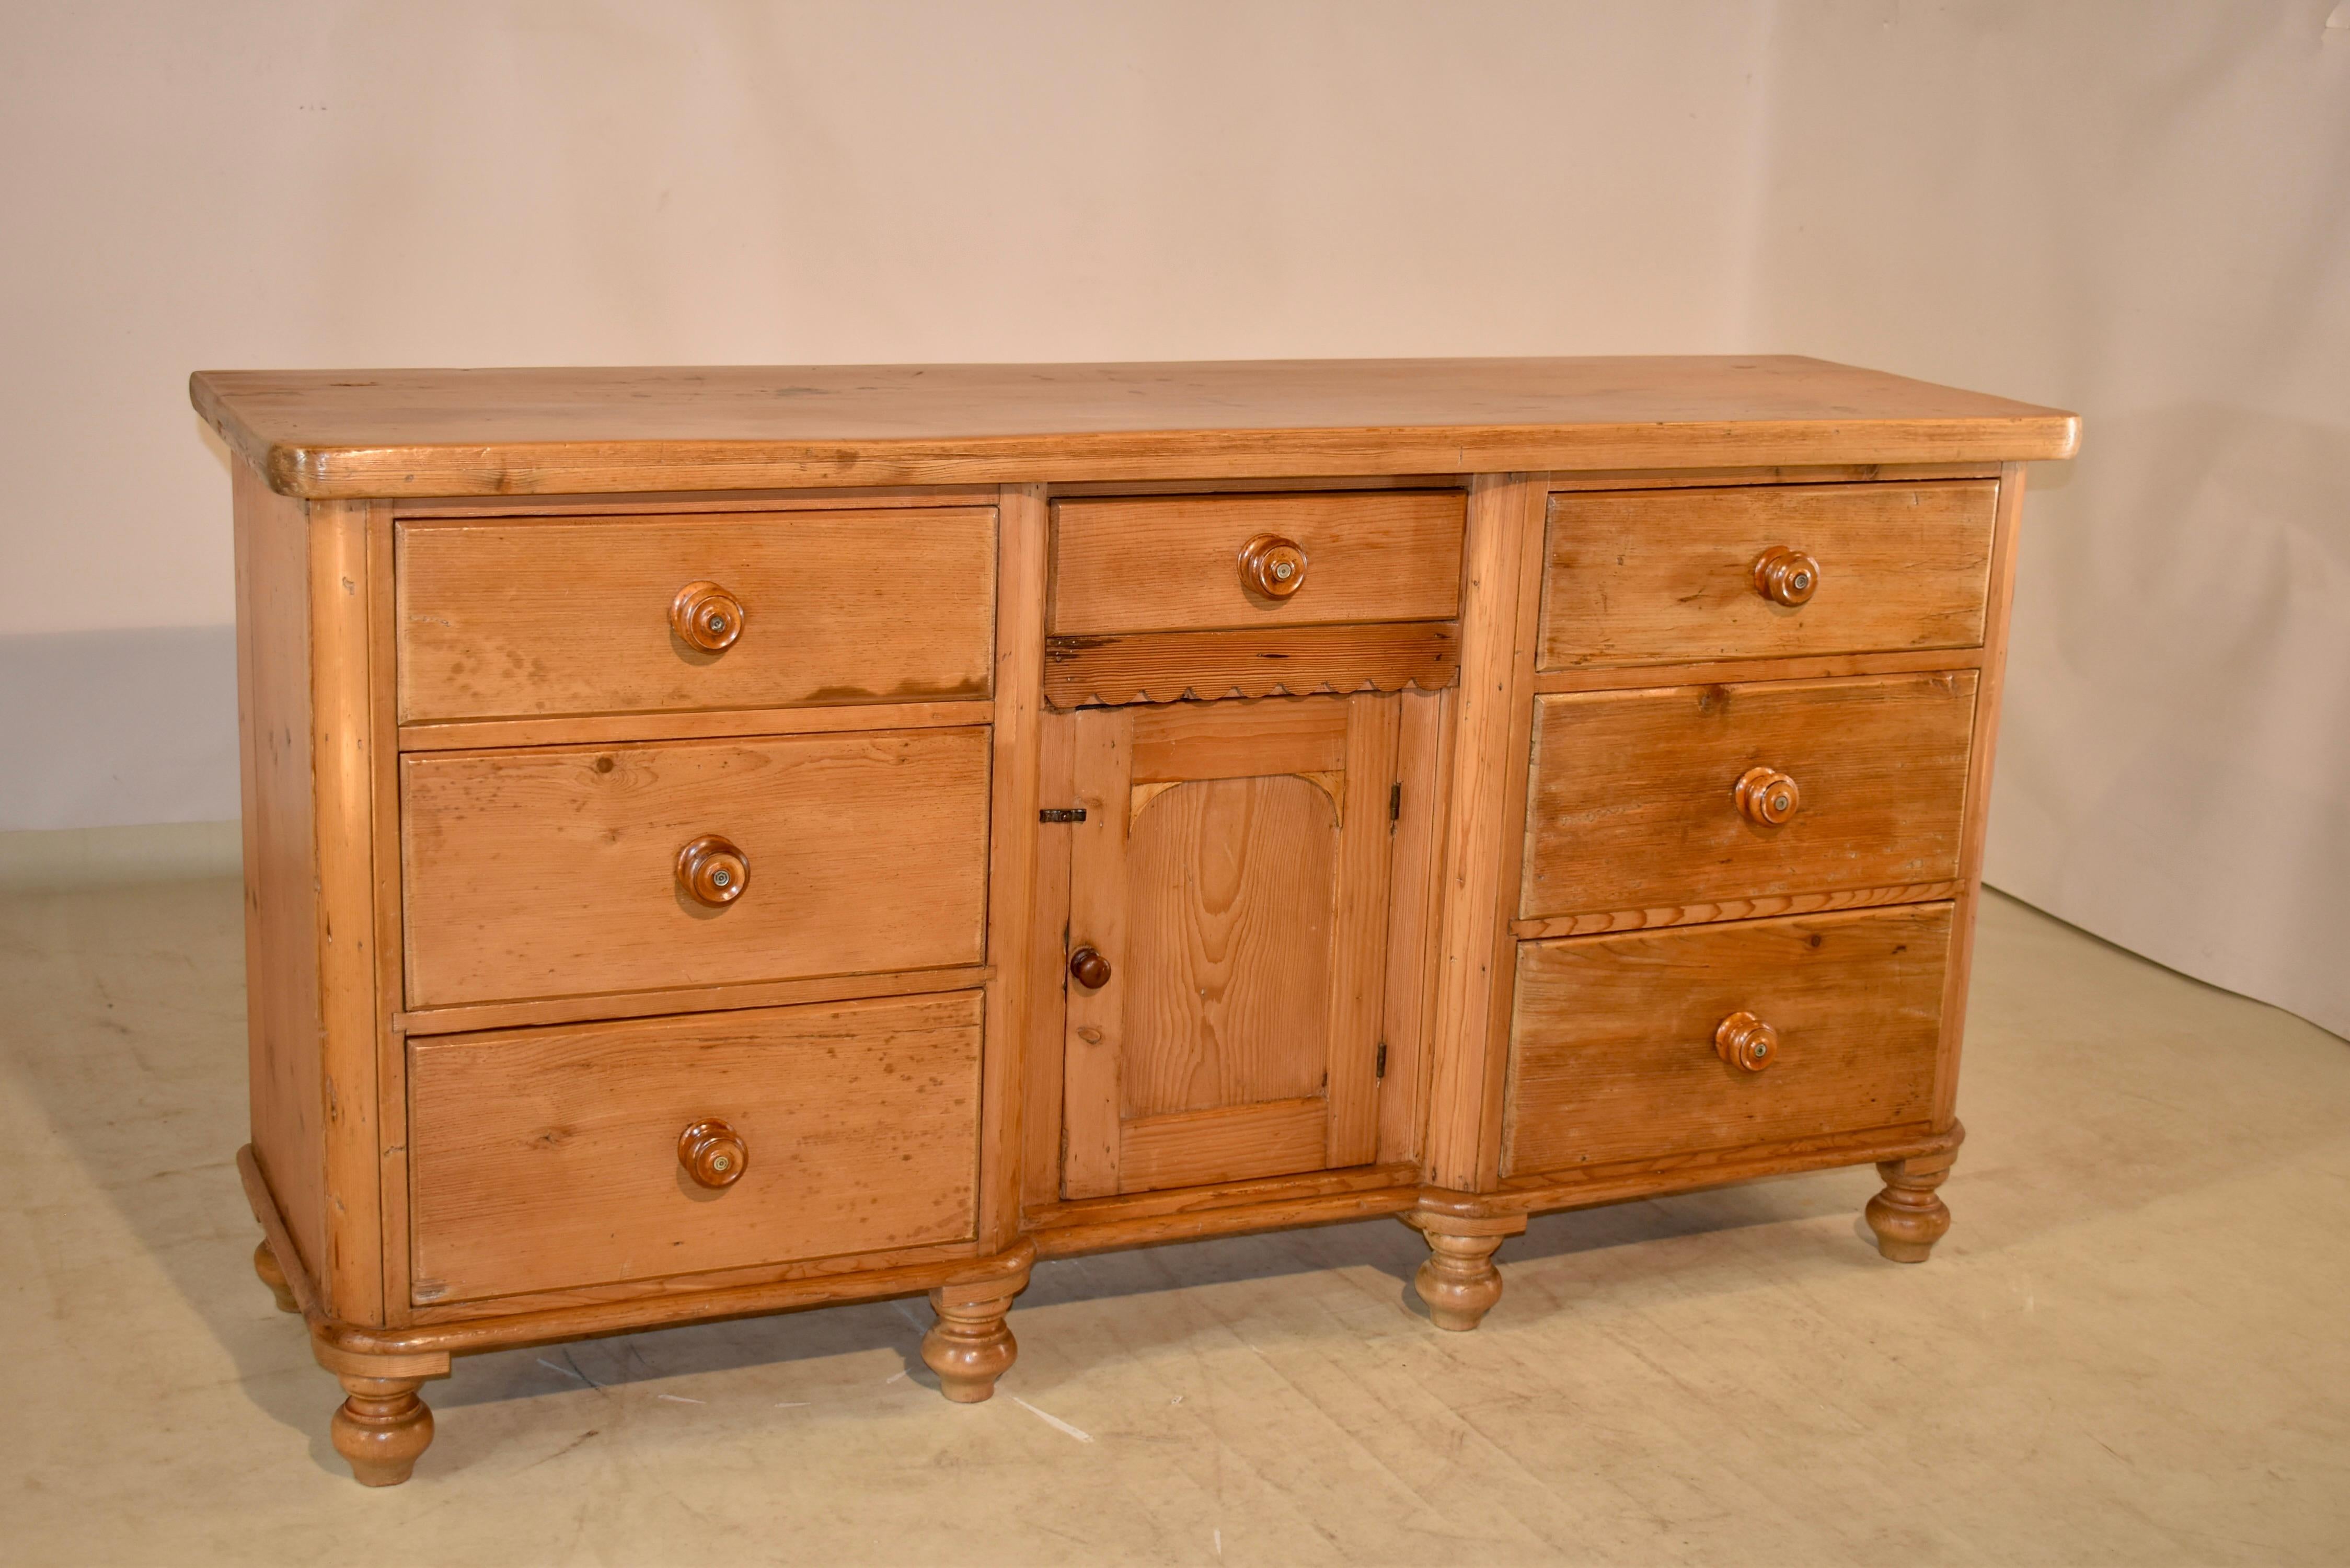 19th century pine dresser base from England with a two plank top, following down to simple sides. There are two banks of three drawers flanking a single drawer over a single door, which opens to reveal storage. The center is stepped back for added